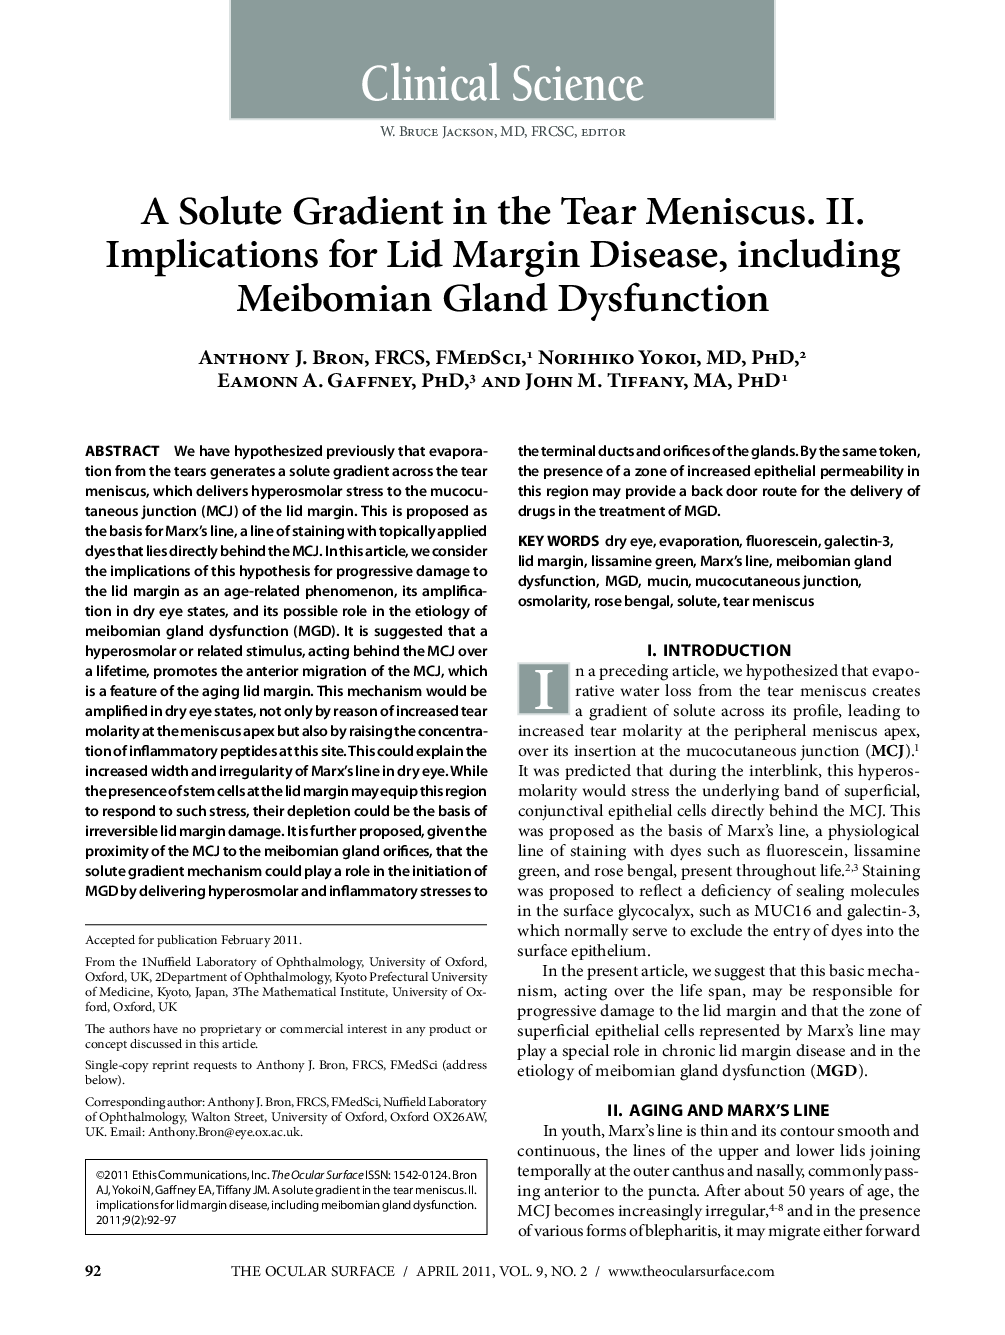 A Solute Gradient in the Tear Meniscus. II. Implications for Lid Margin Disease, including Meibomian Gland Dysfunction 